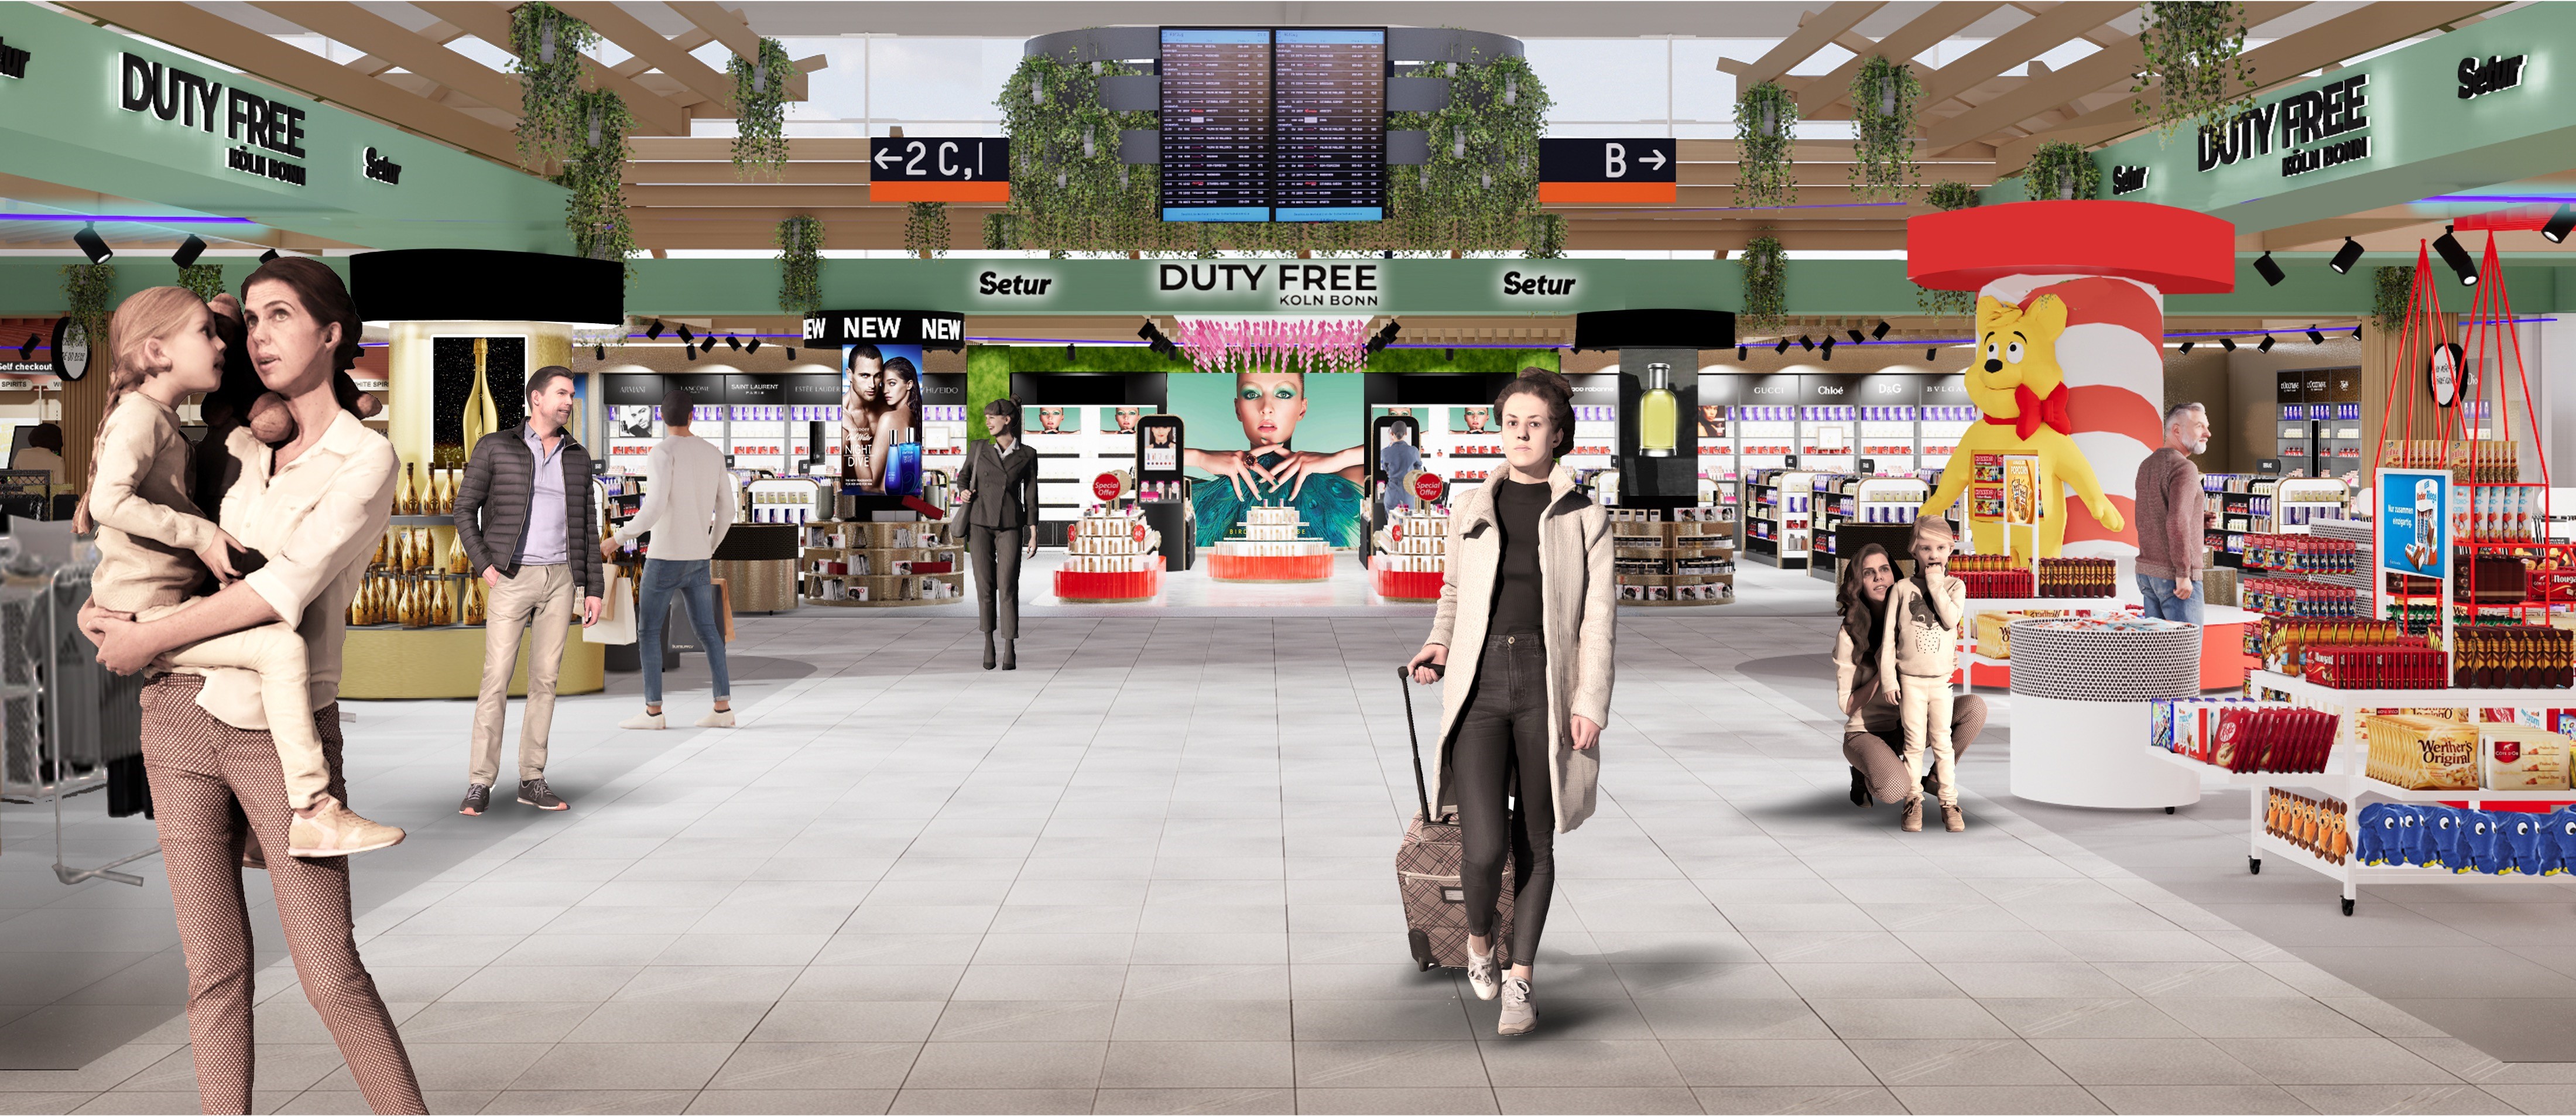 Setur Duty Free secures seven-and-a-half year travel retail contract at Cologne Bonn